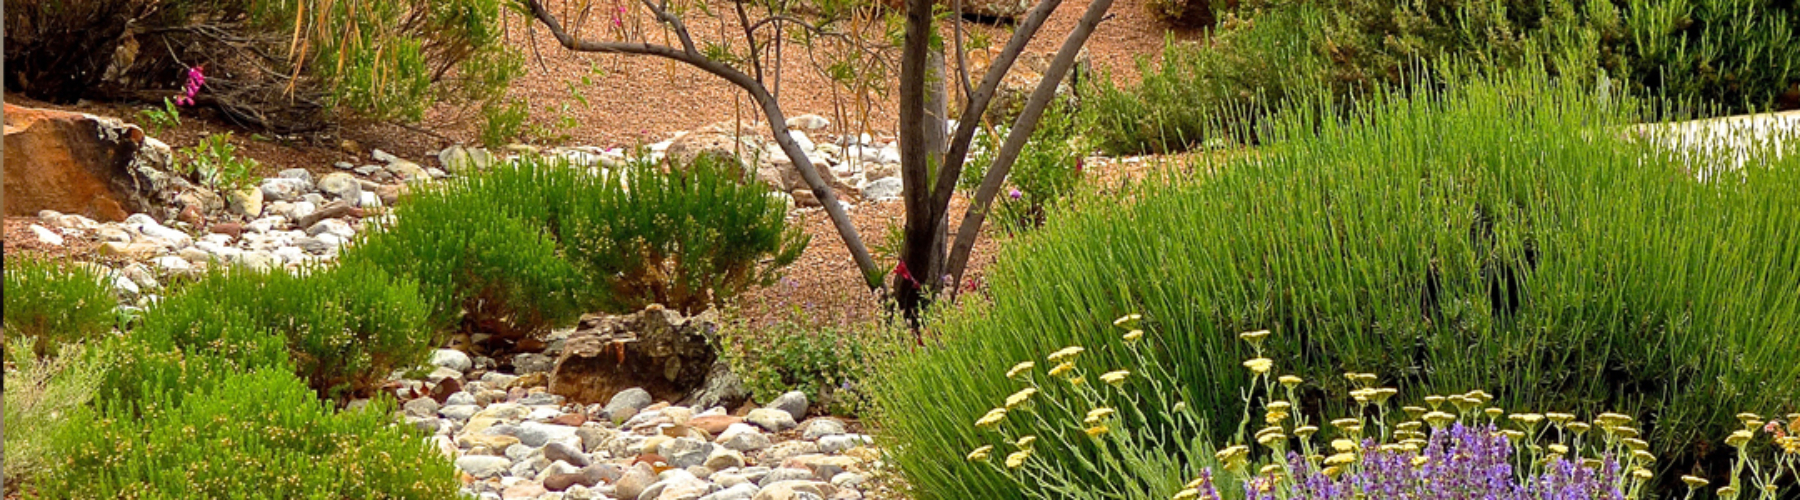 Beautiful xeriscape landscape with rock swale